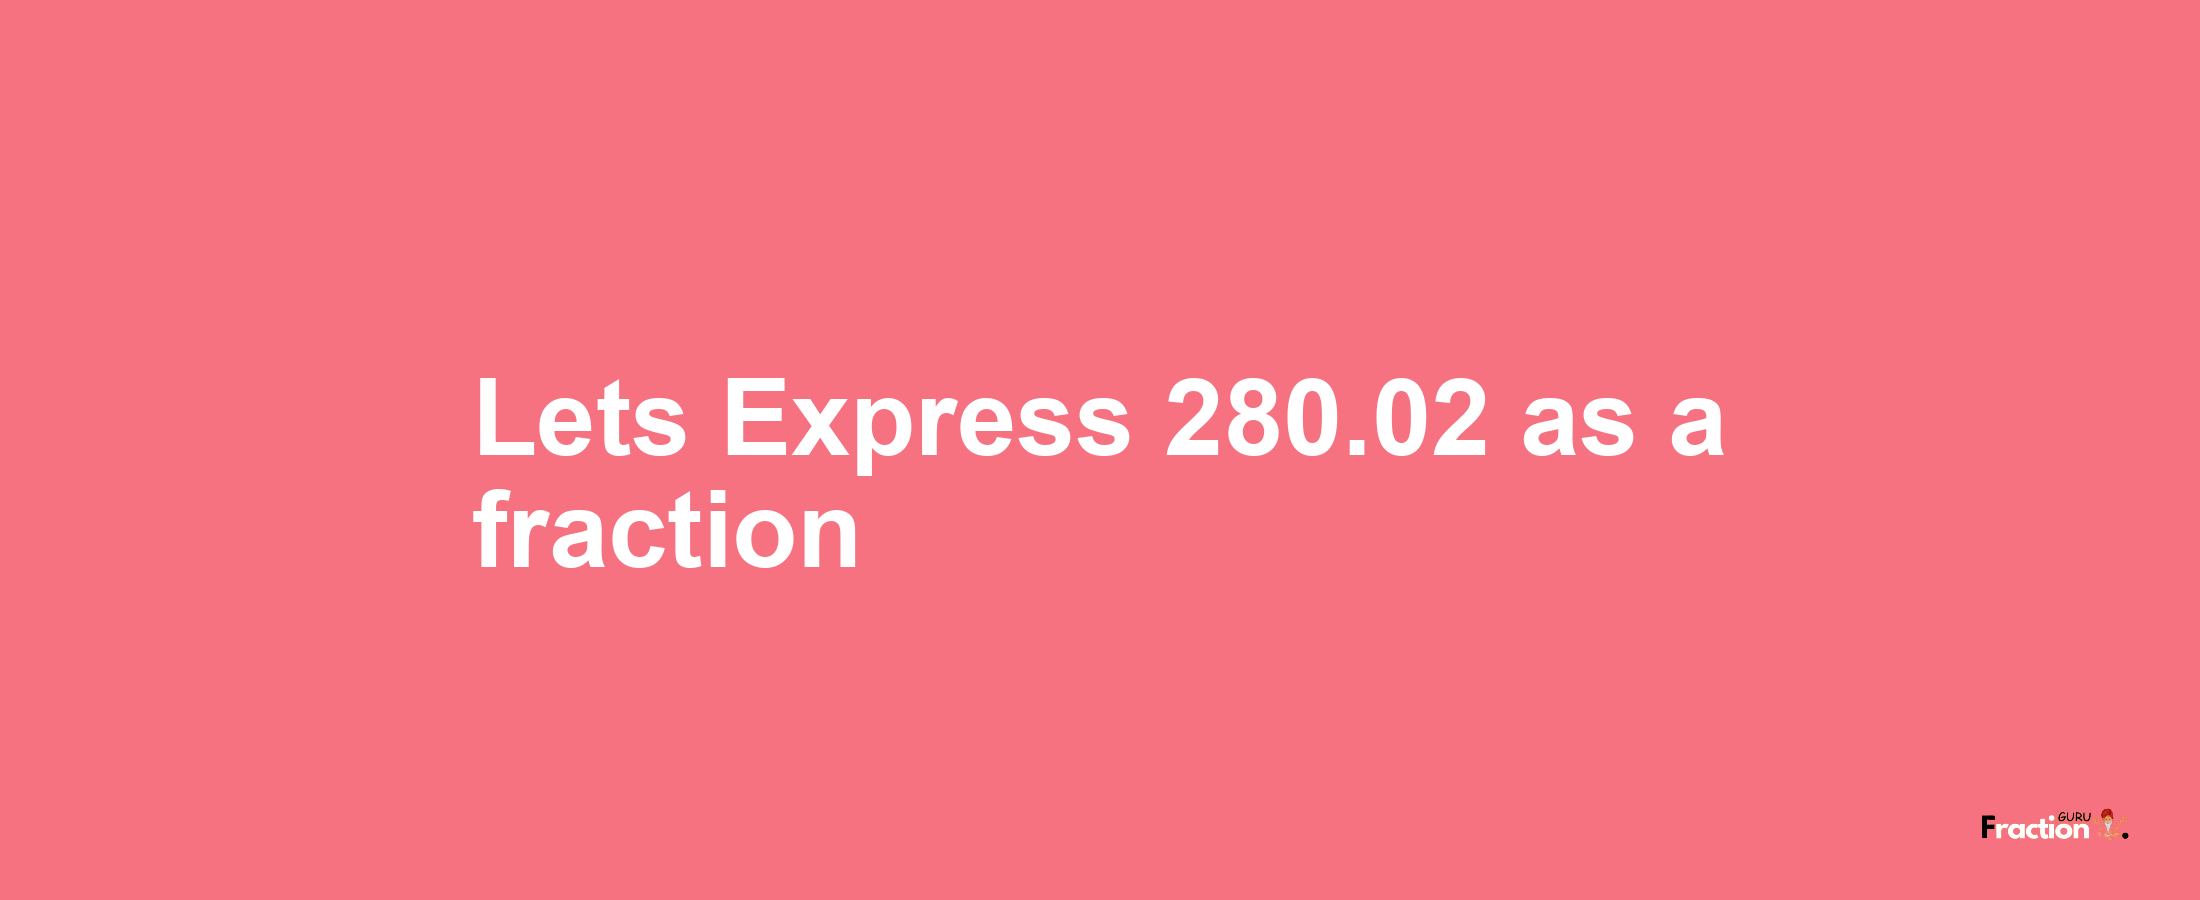 Lets Express 280.02 as afraction